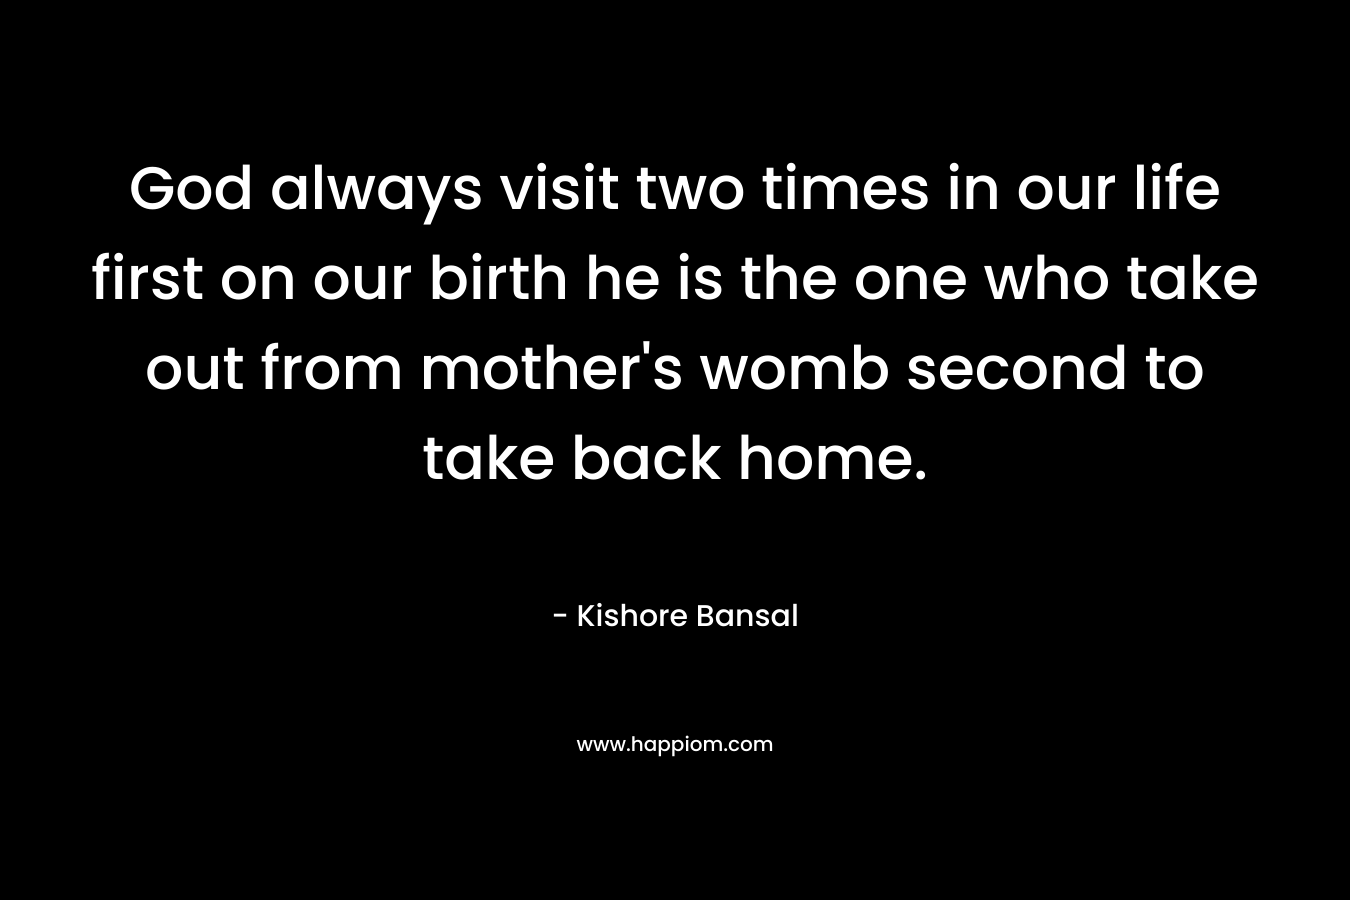 God always visit two times in our life first on our birth he is the one who take out from mother's womb second to take back home.